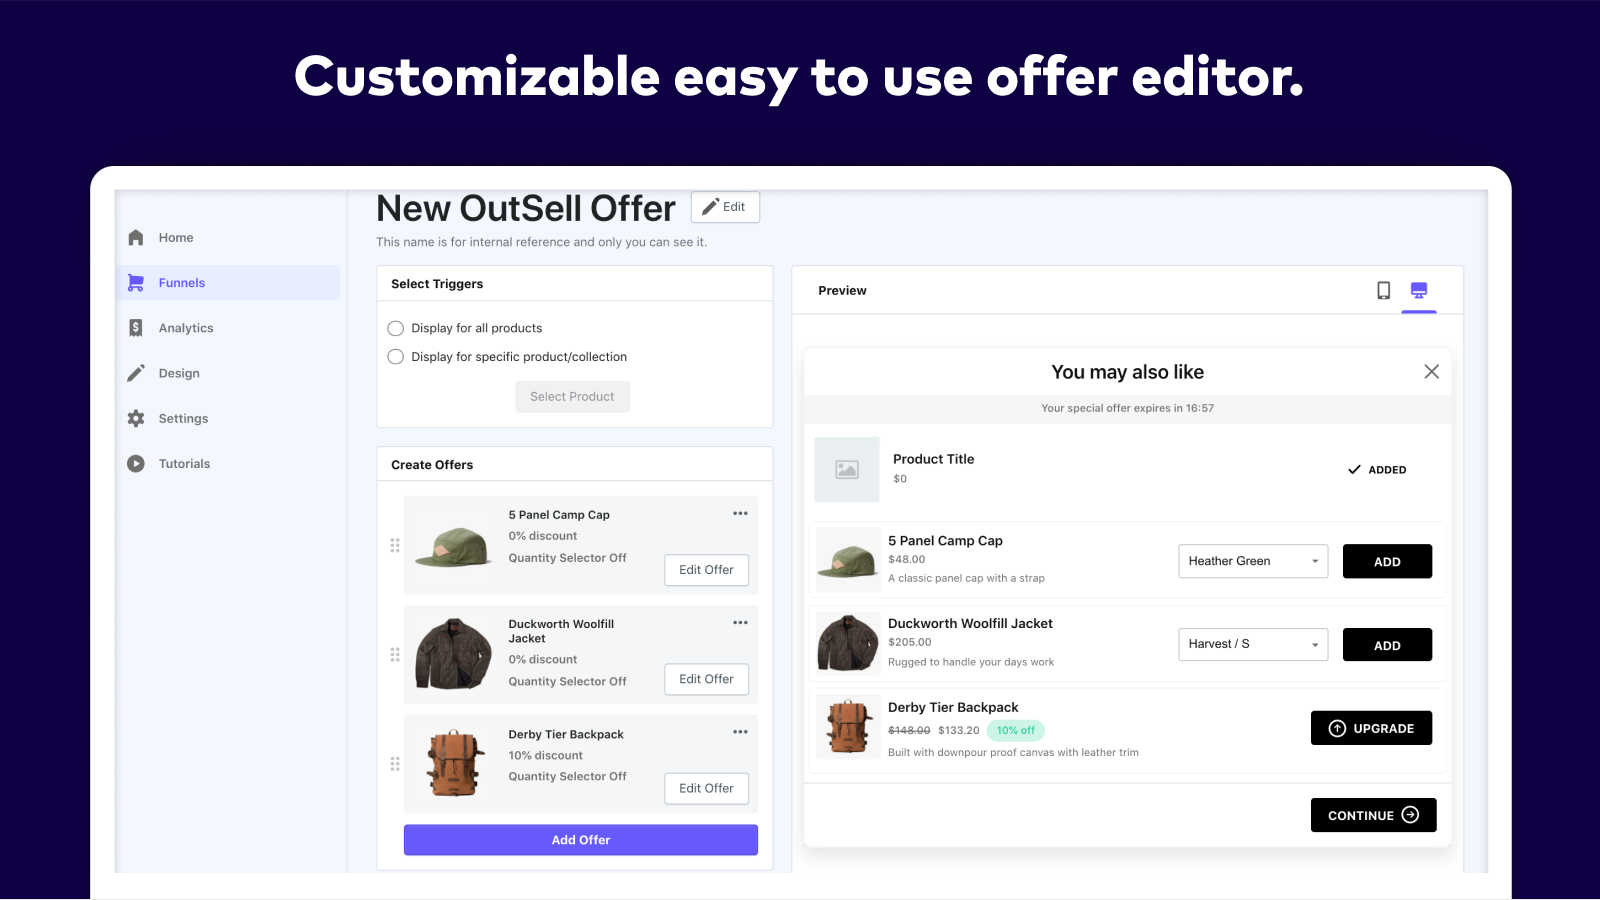 Customizable easy to use offer editor